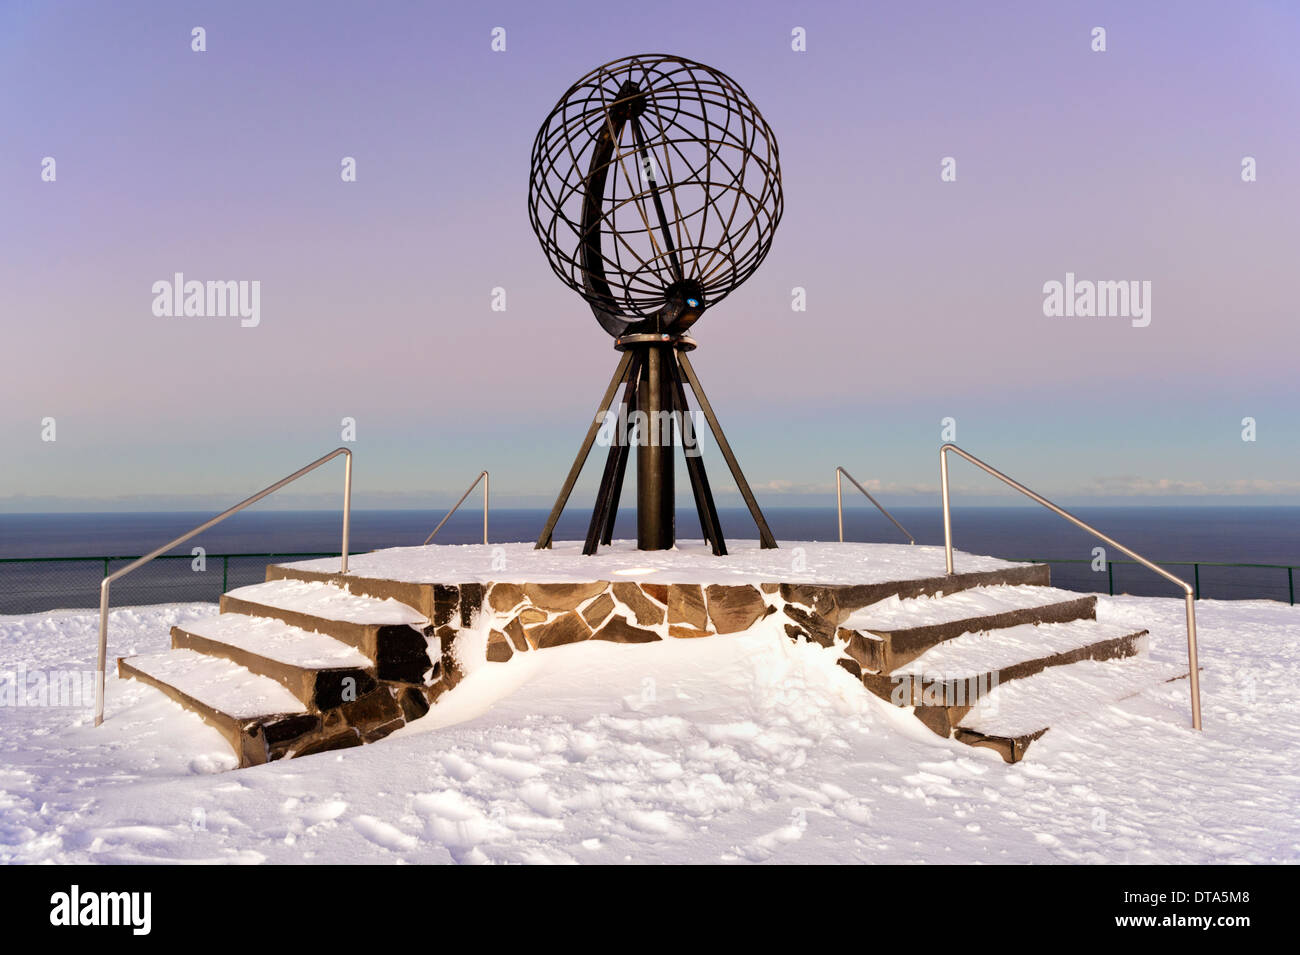 Winter at Nordkapp with globe sculpture, near Honningsvåg, Finnmark, Norway, the most northern point in Europe Stock Photo